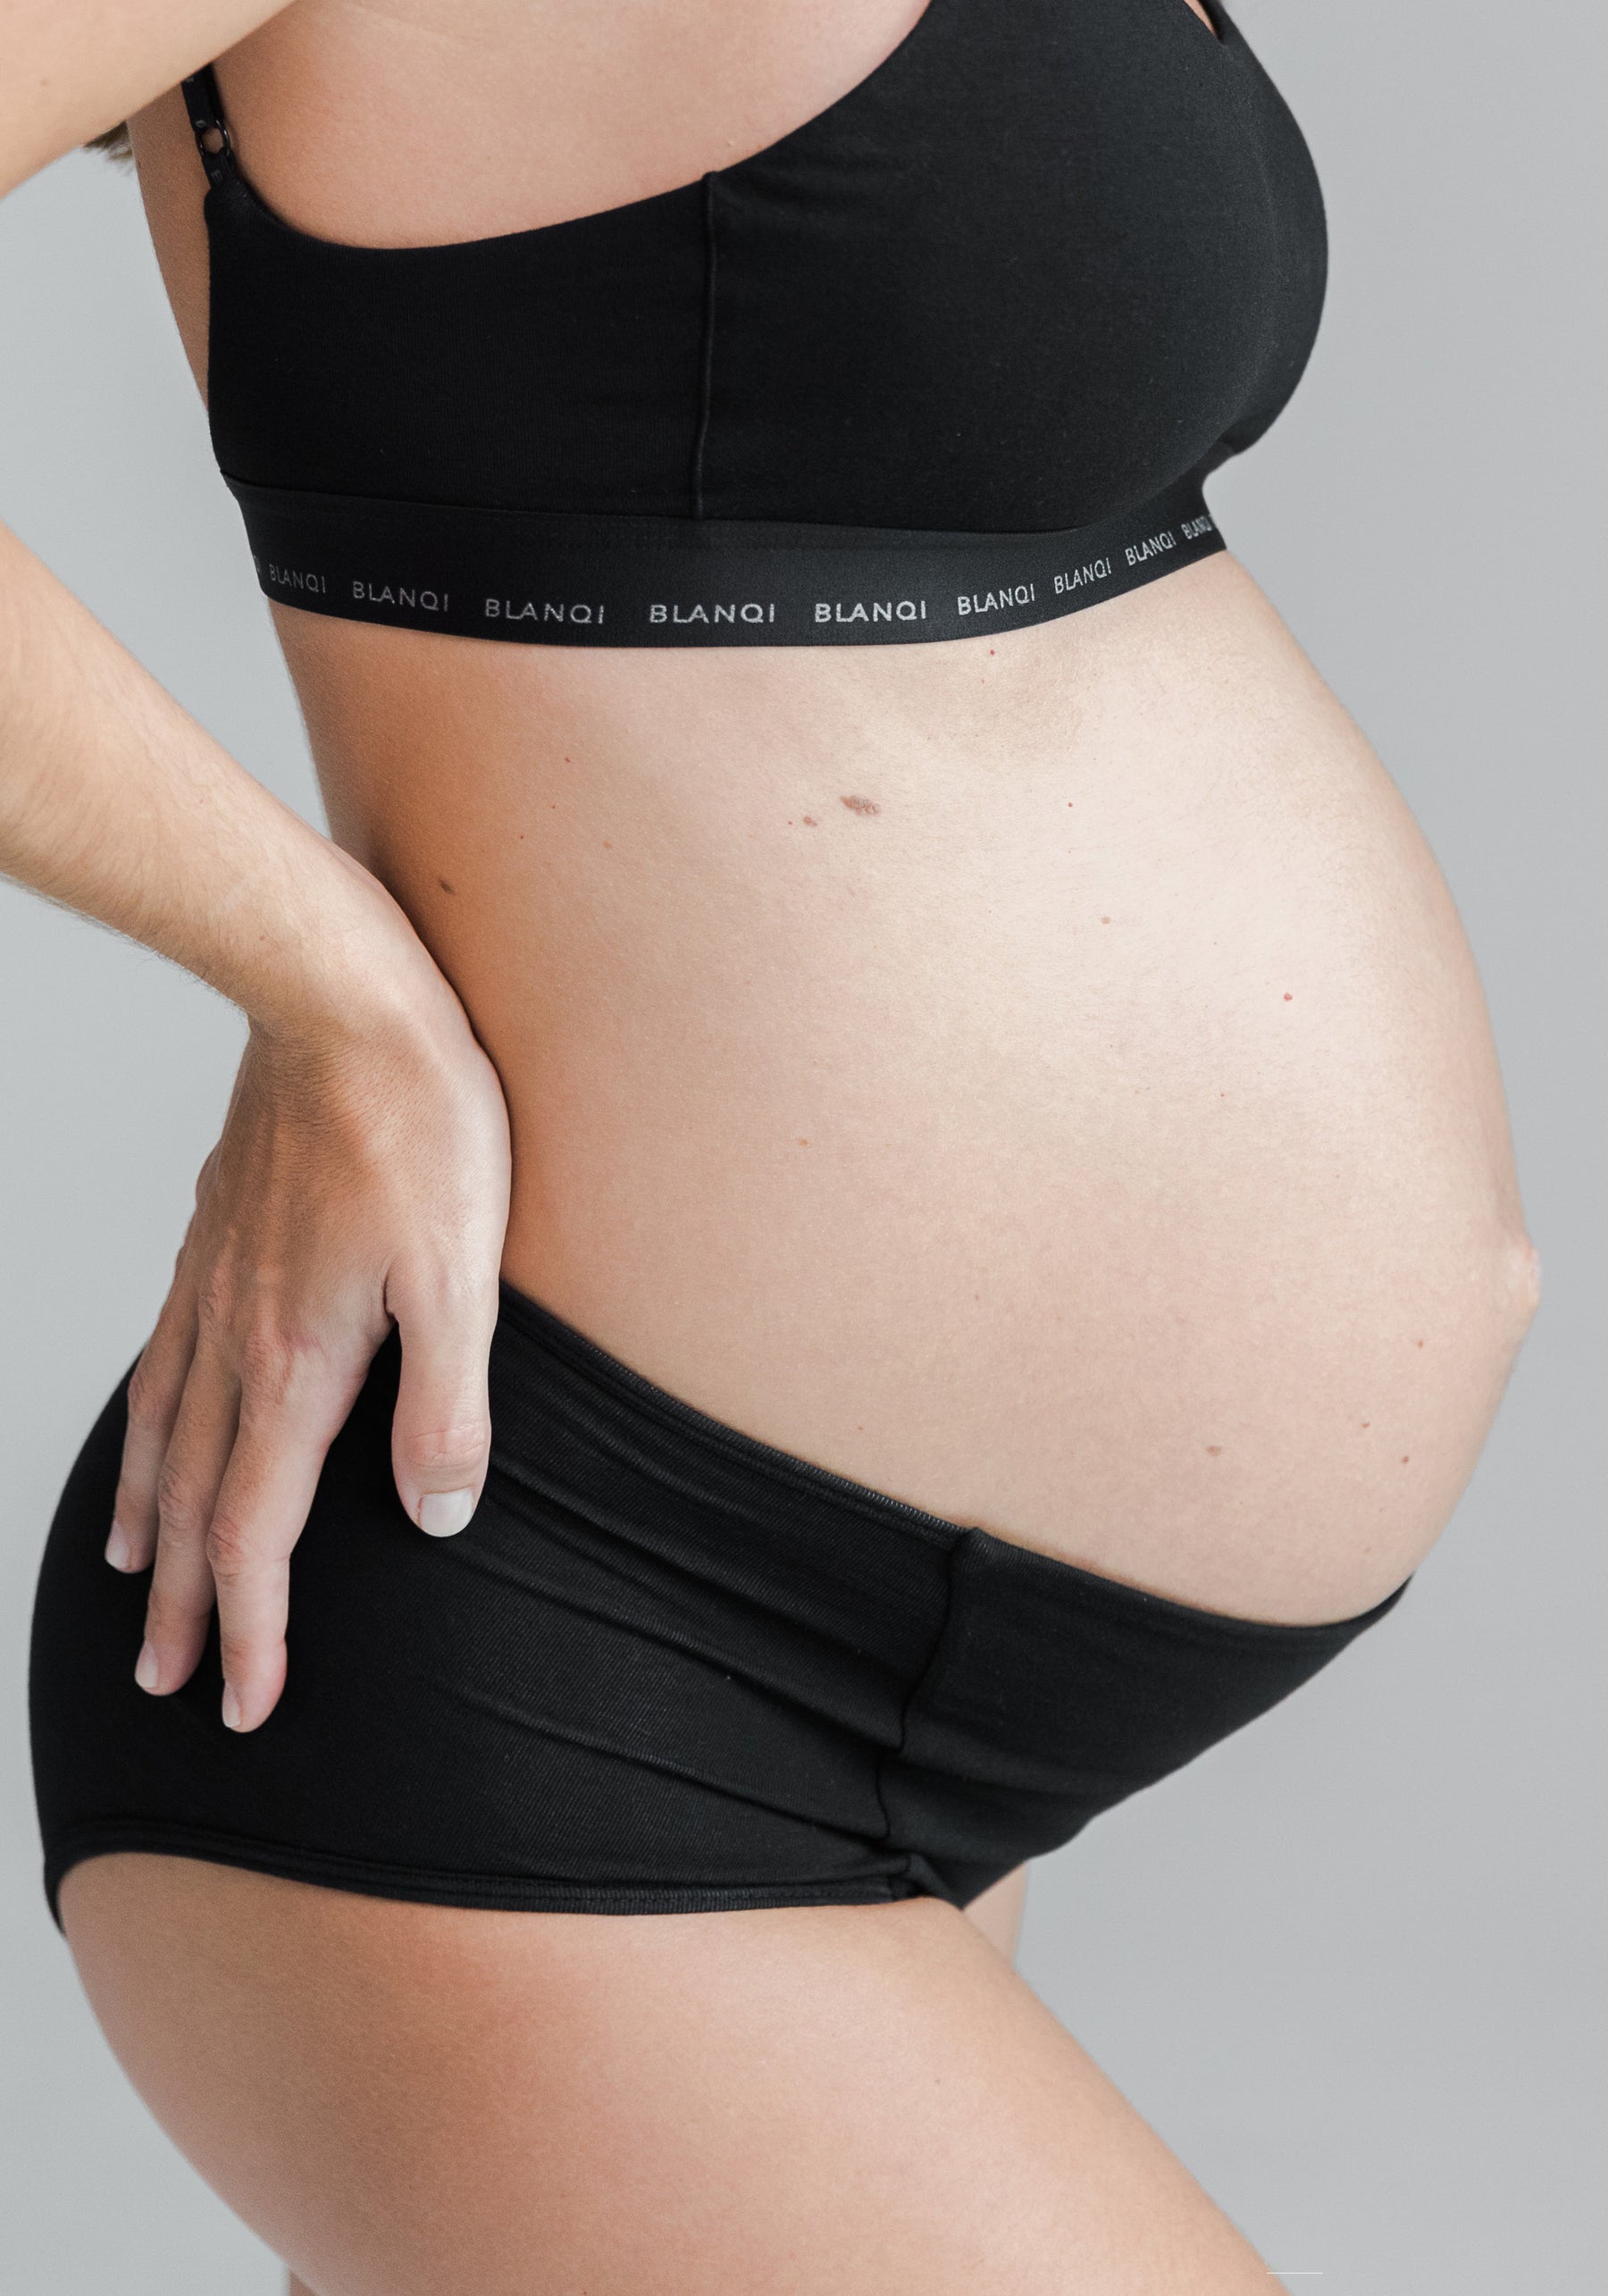 Buy Womens Bonds Maternity Bumps Bikini Underwear Undies Black Online   . Designed to support pre and post-baby bumps of all sizes,  Bonds’ Maternity Bikini features soft fabric and a beautiful,  flattering